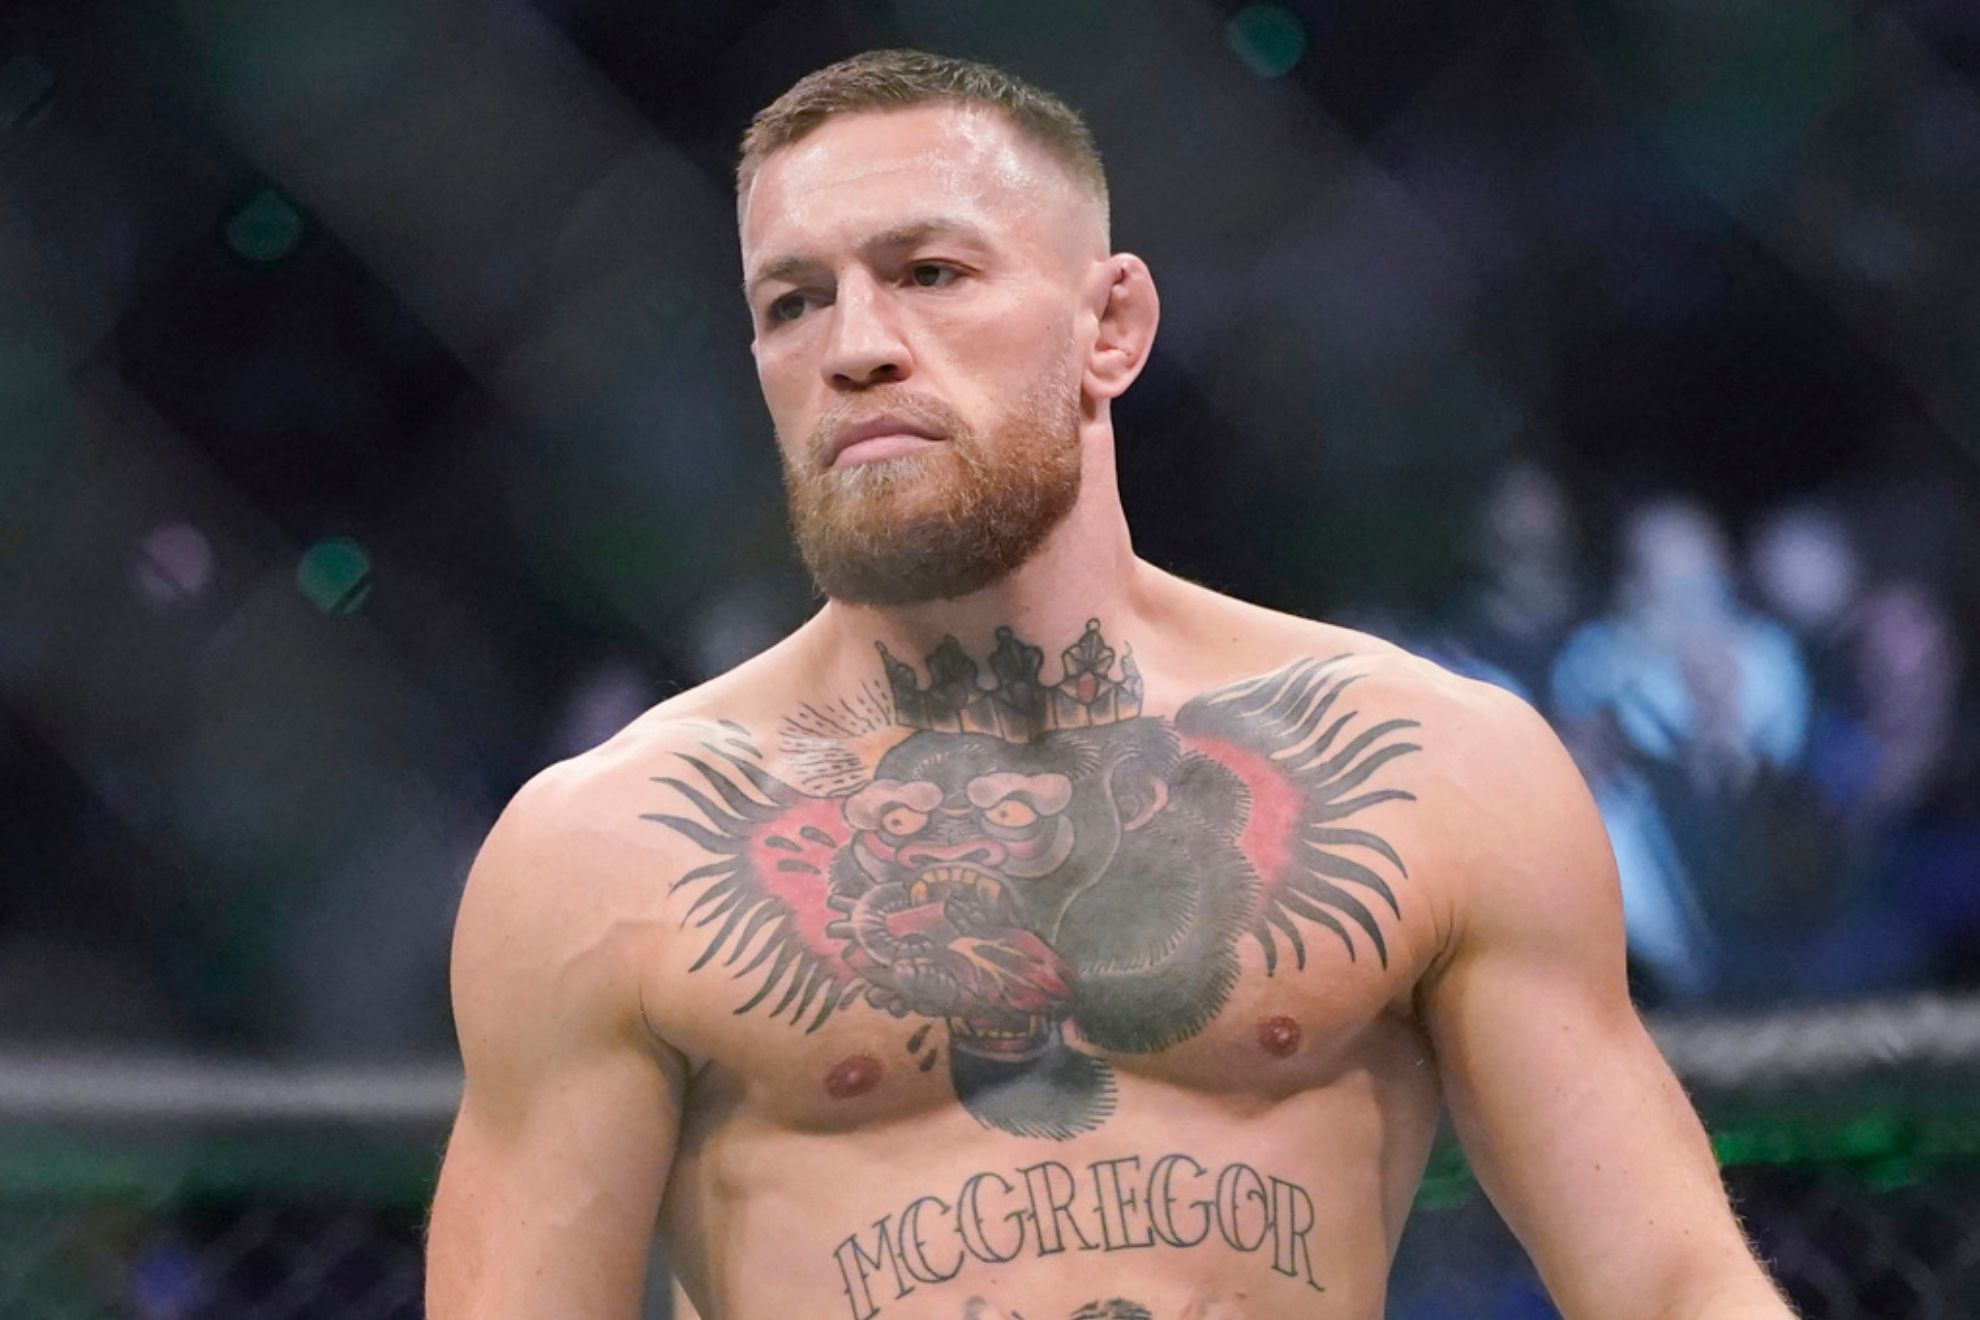 McGregor is ready to return to the octagon